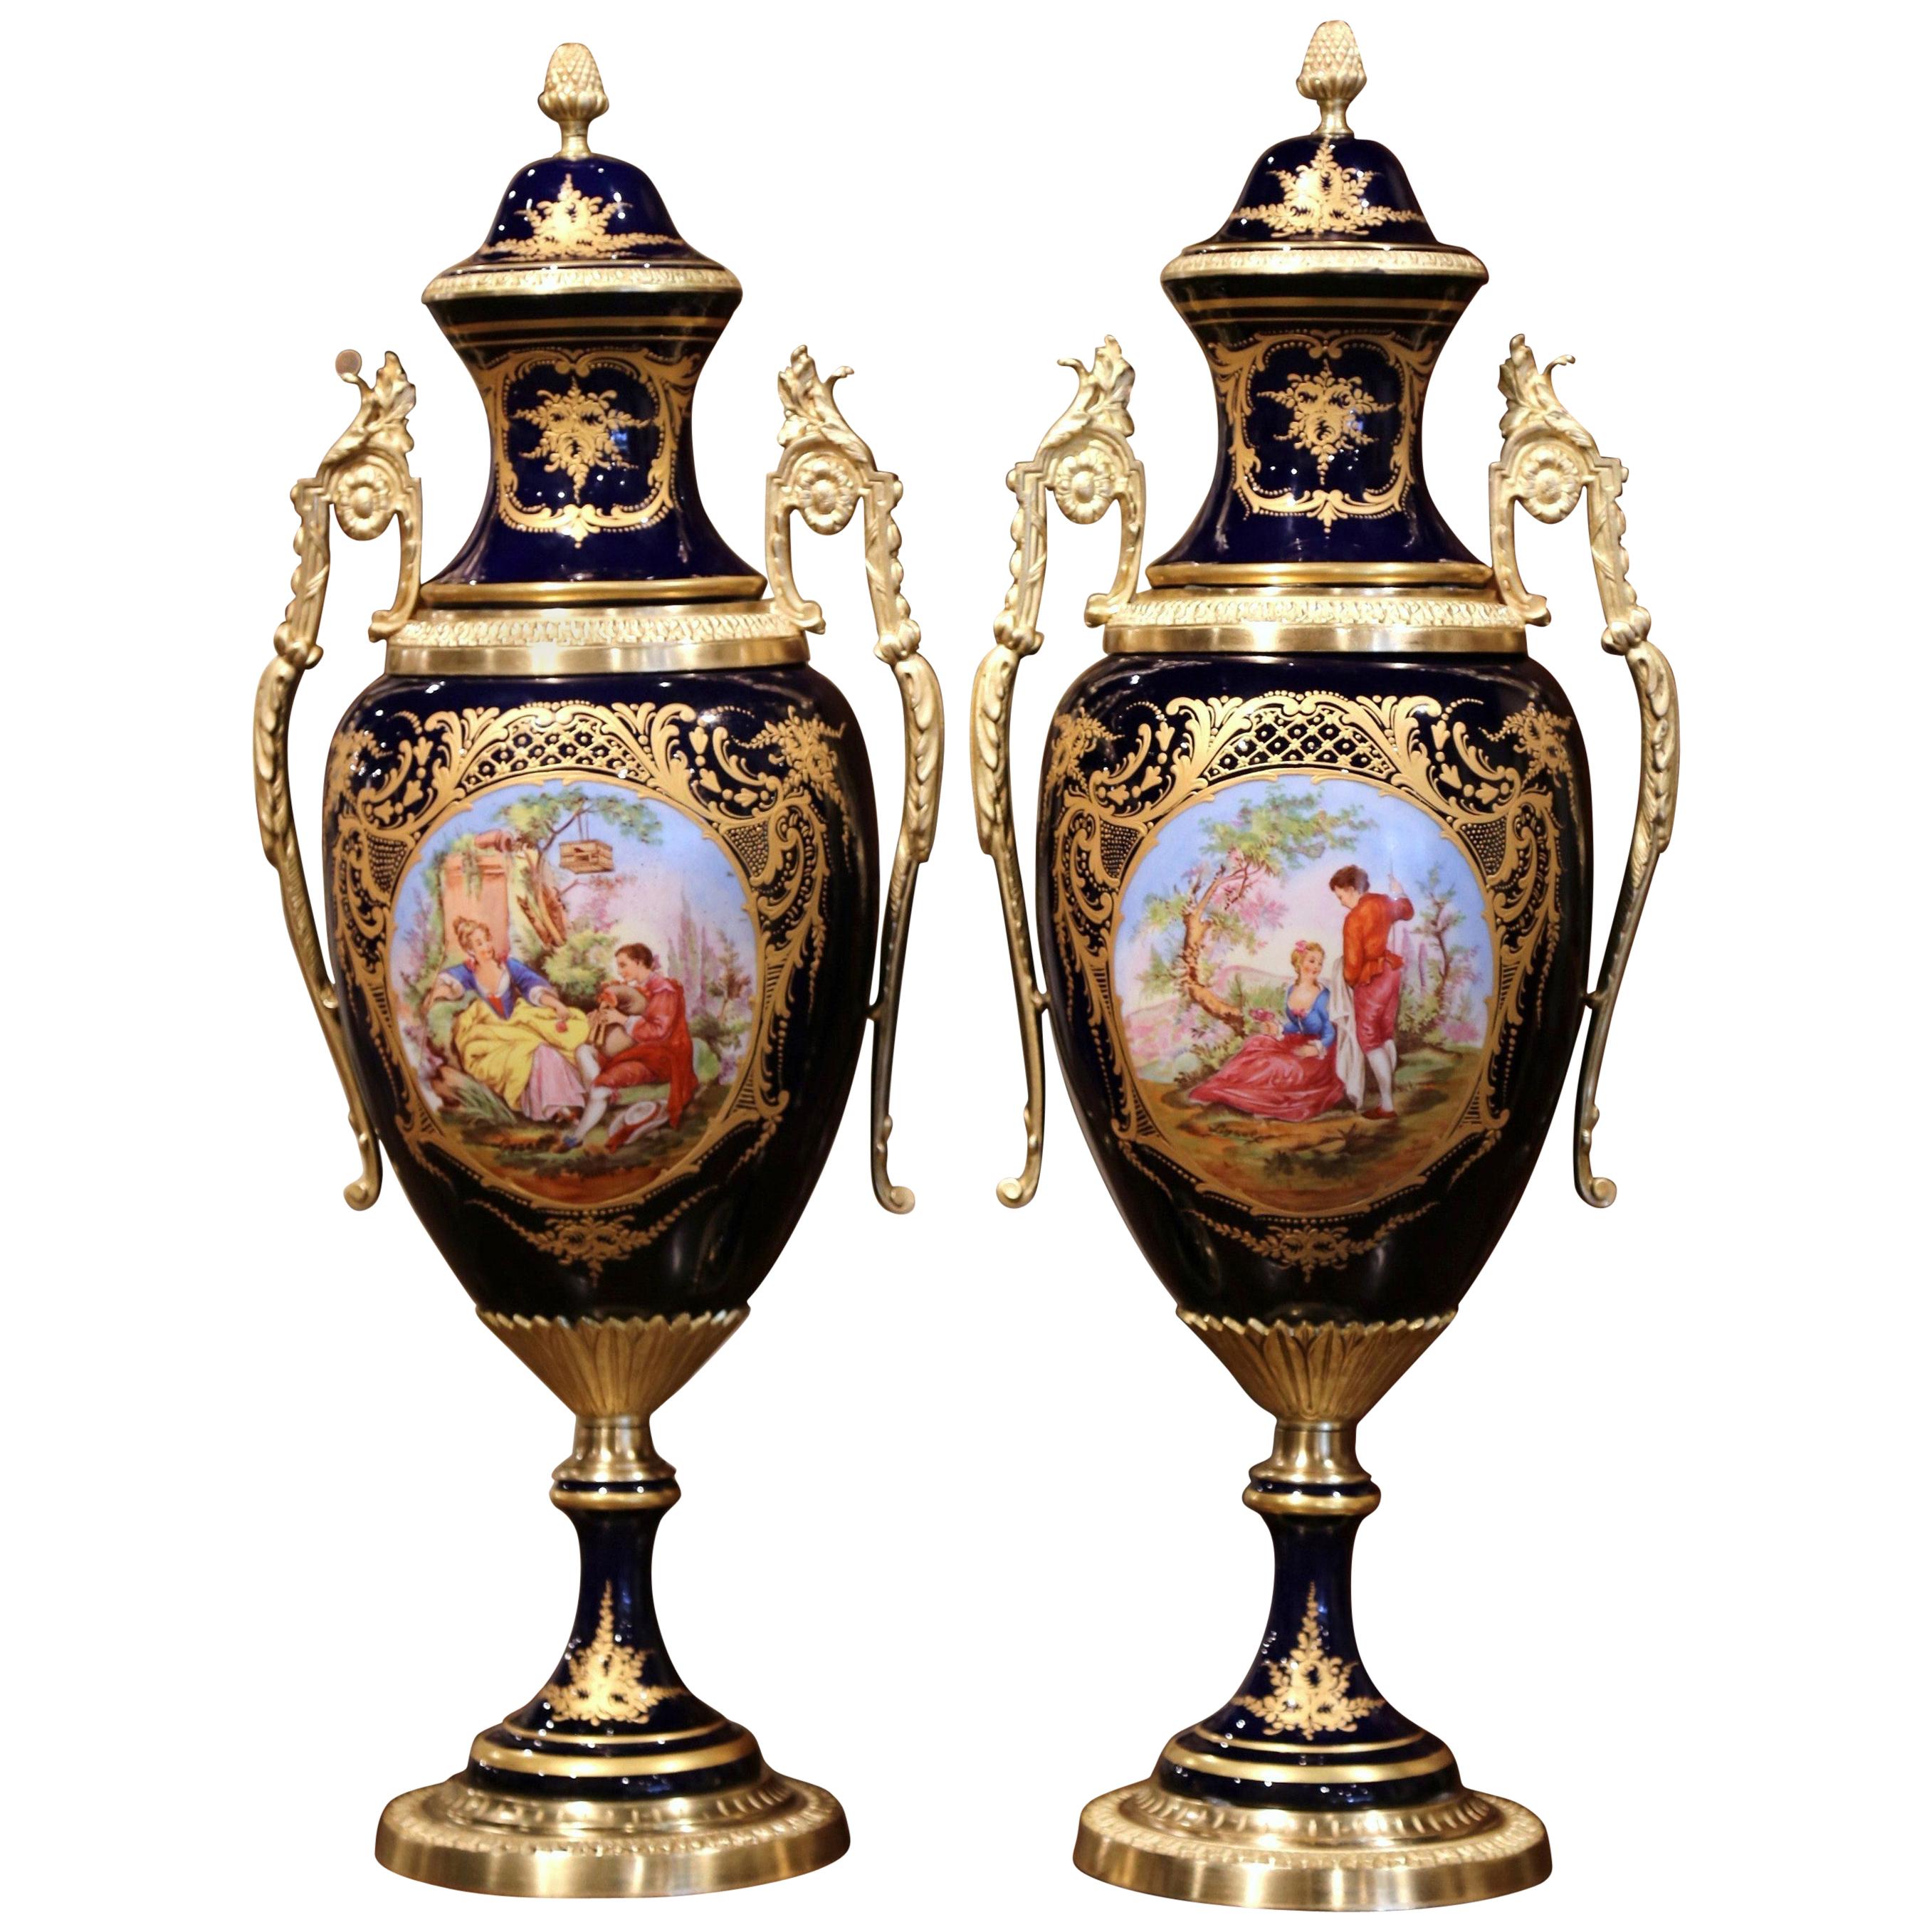 Pair of Mid-20th Century French Blue Royal Porcelain and Bronze Sèvres Urns